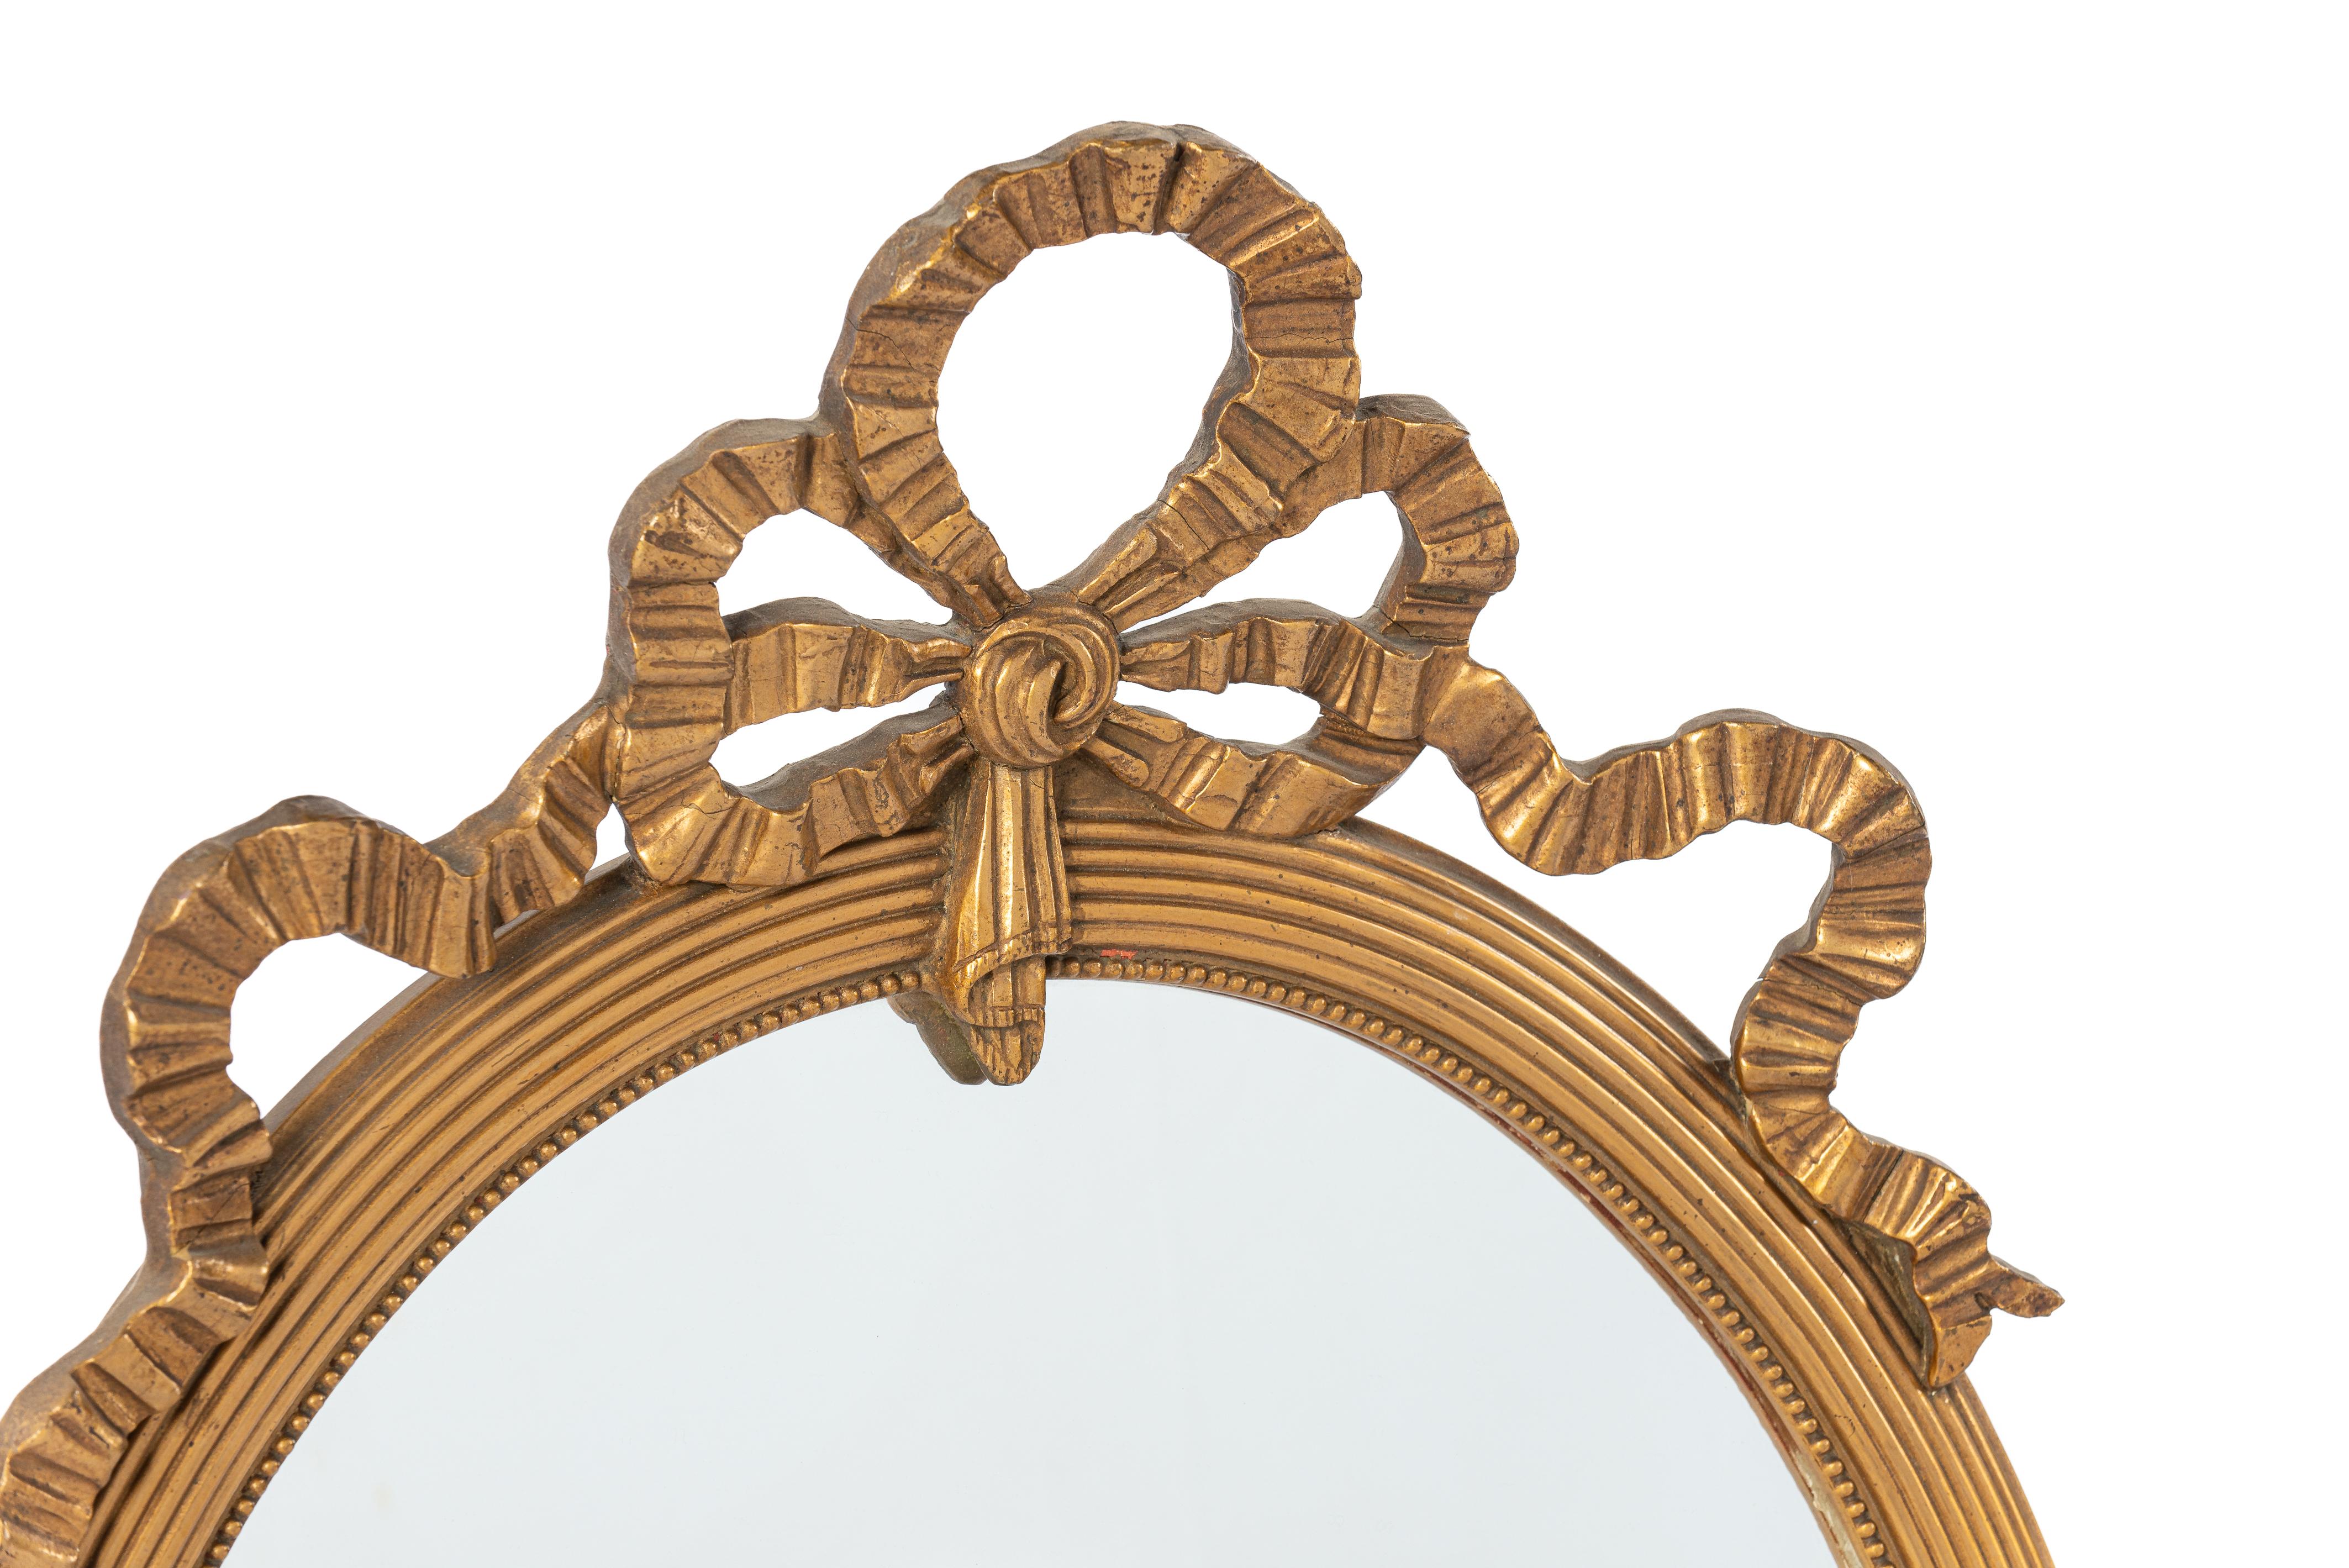 This stunning and elegant oval mirror was crafted in northern France in the early twentieth century, around 1910. The frame is made of linden wood and smoothed with gesso. Adorned with subtle and detailed molding, the frame also features a